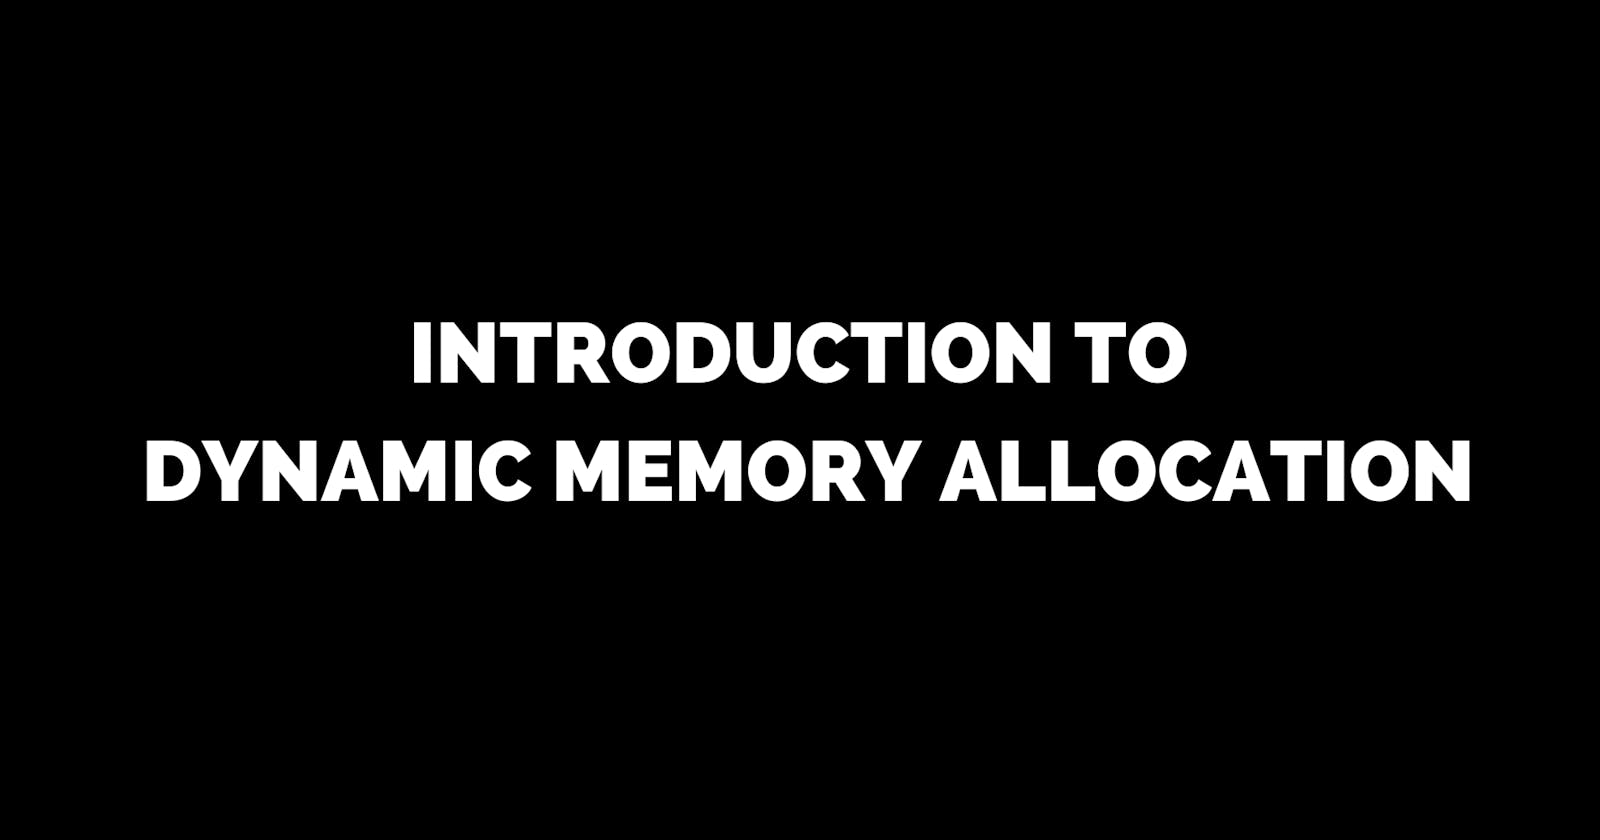 Introduction to Dynamic Memory Allocation